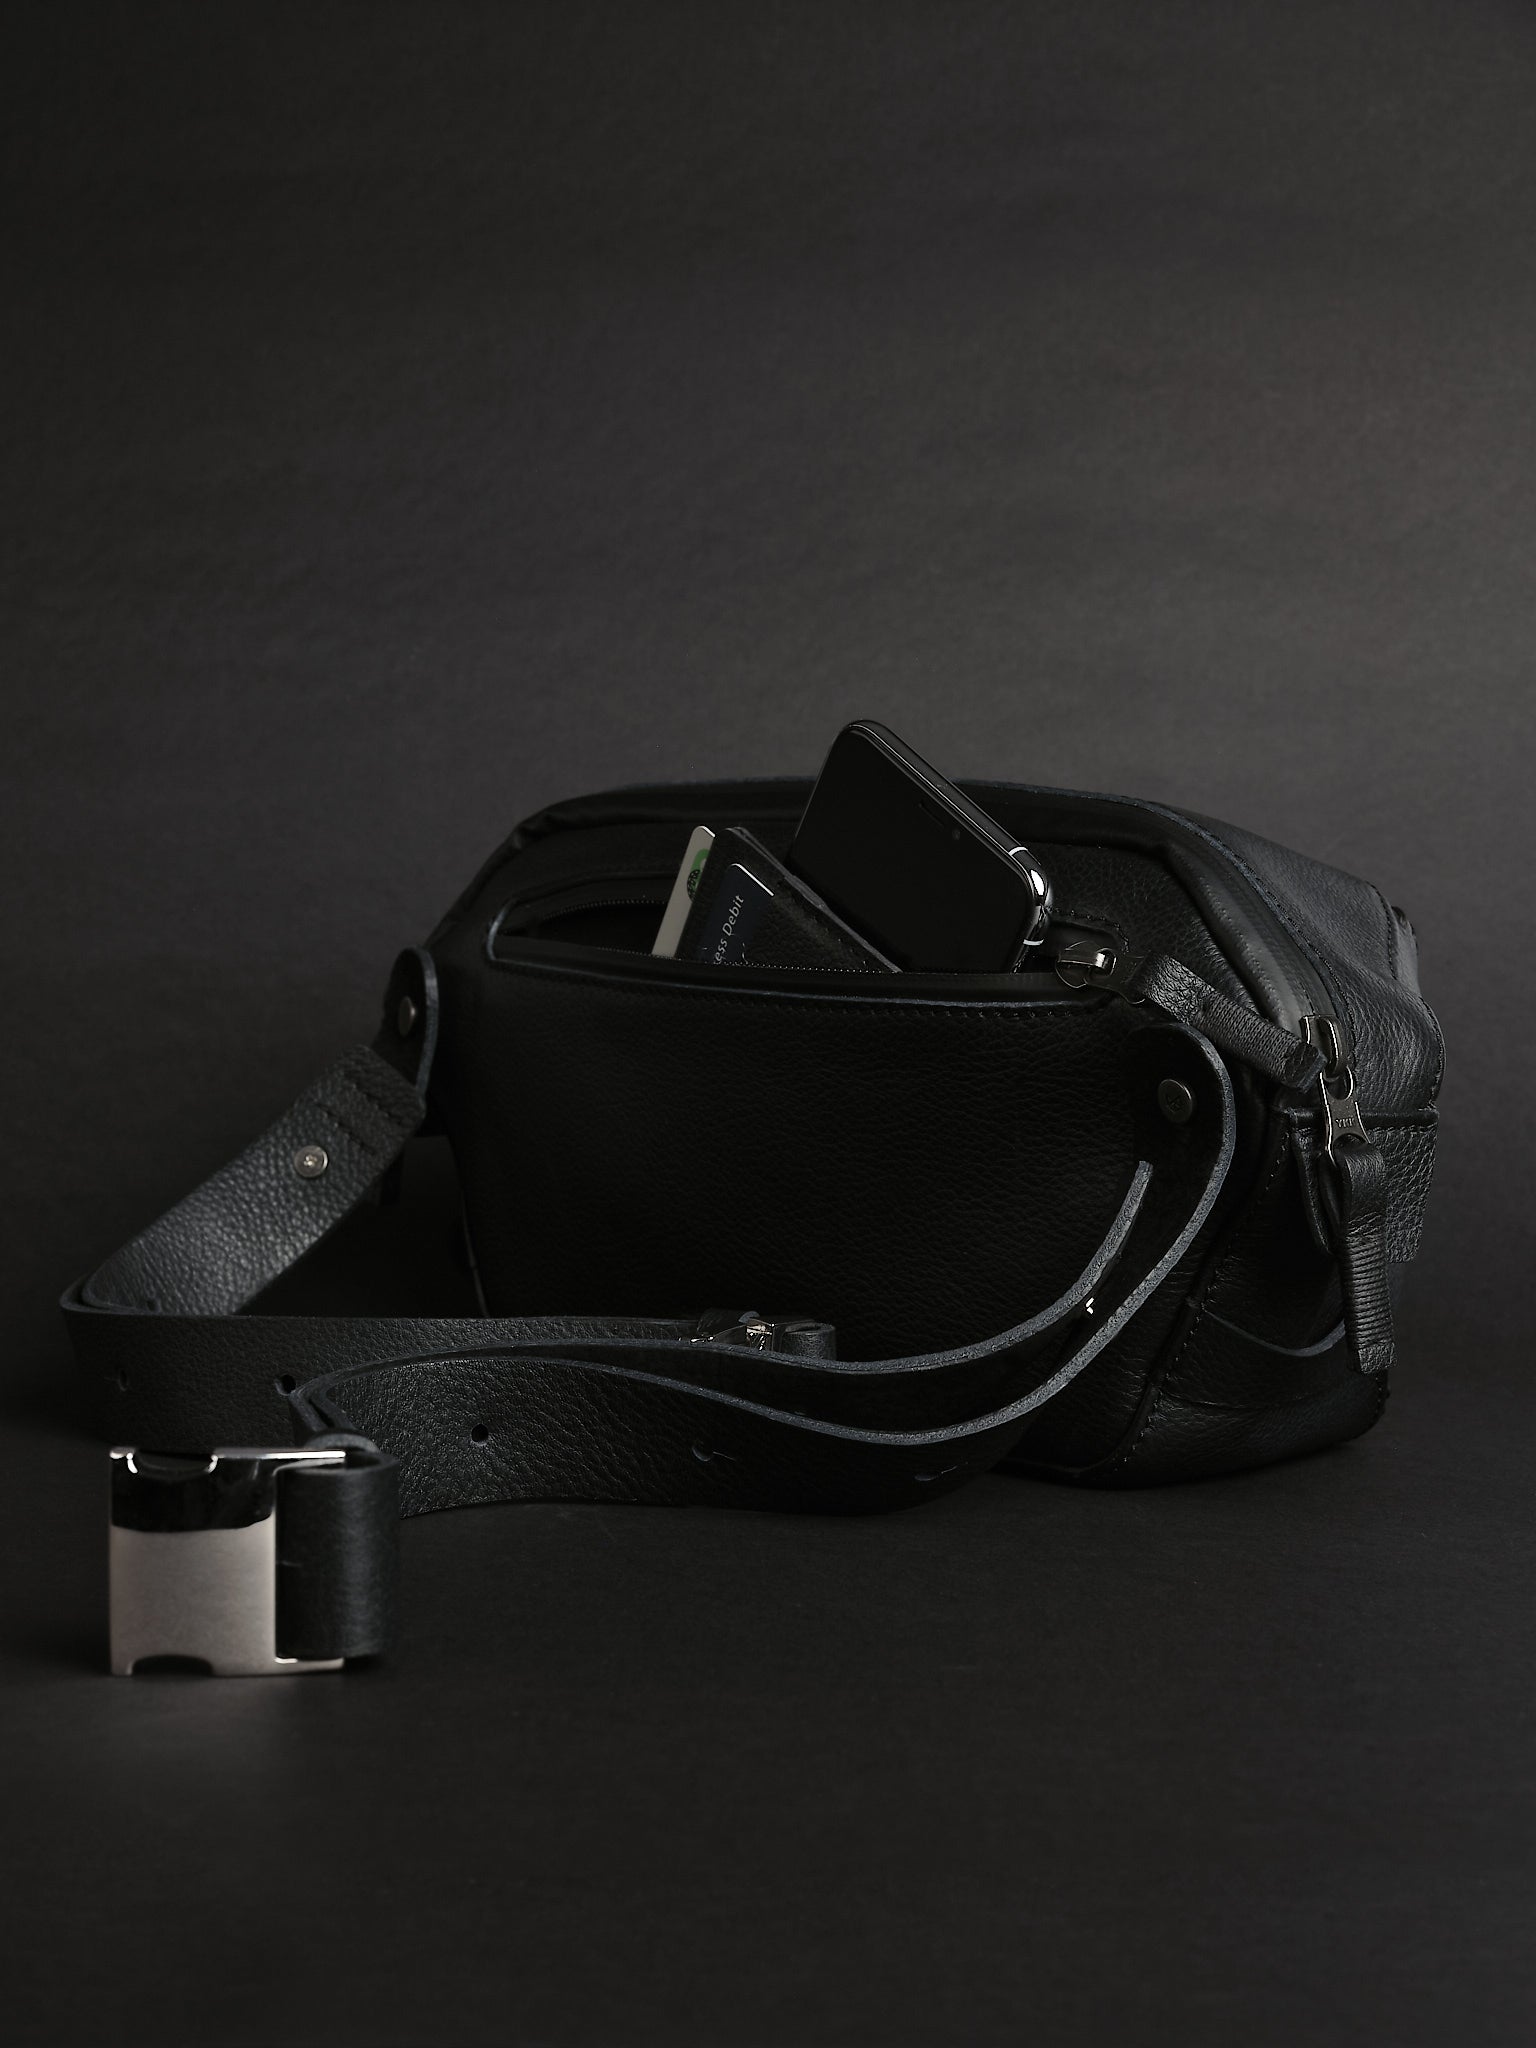 Small Fanny Pack. Mens Sling Bag Black by Capra Leather